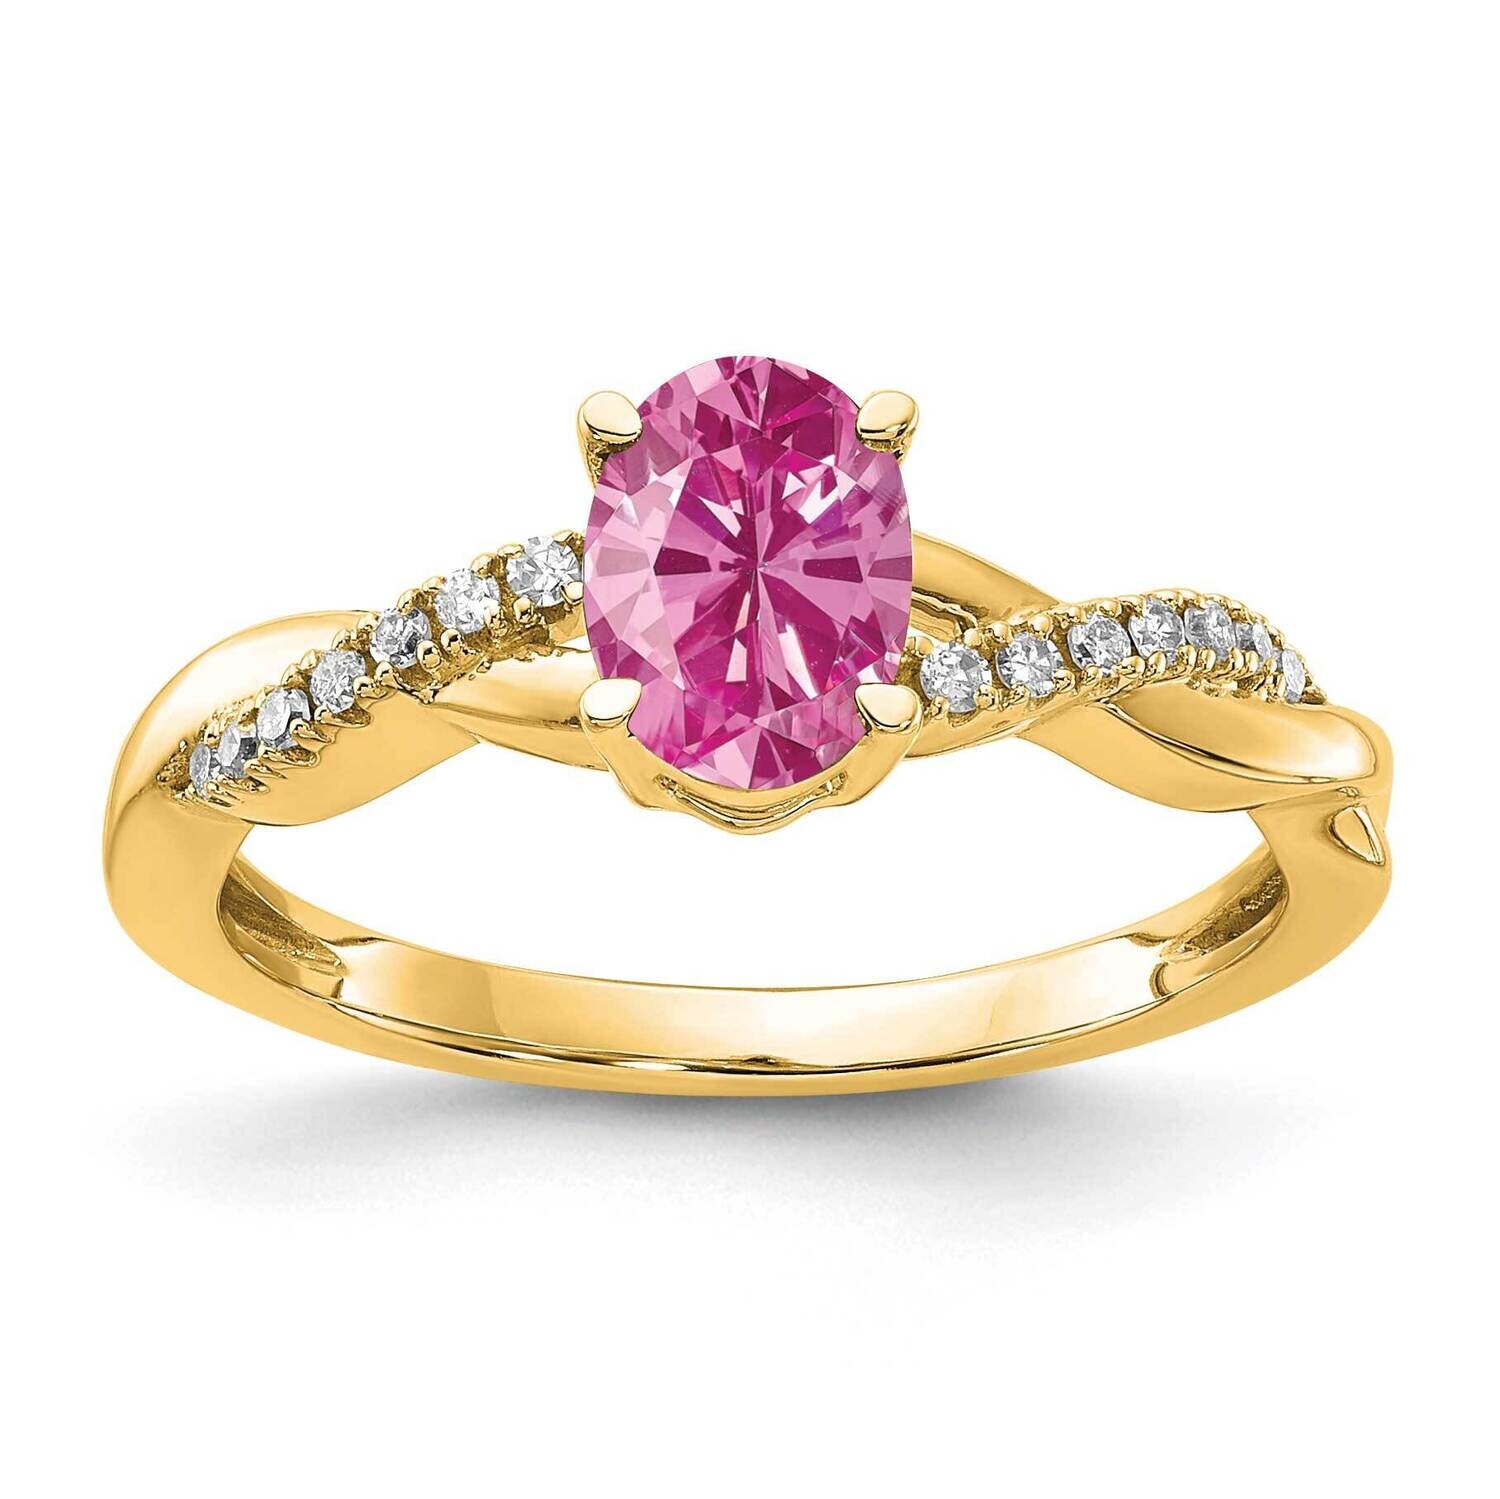 Oval Created Pink Sapphire Diamond Ring 10k Gold RM4235-CPS-008-1YA